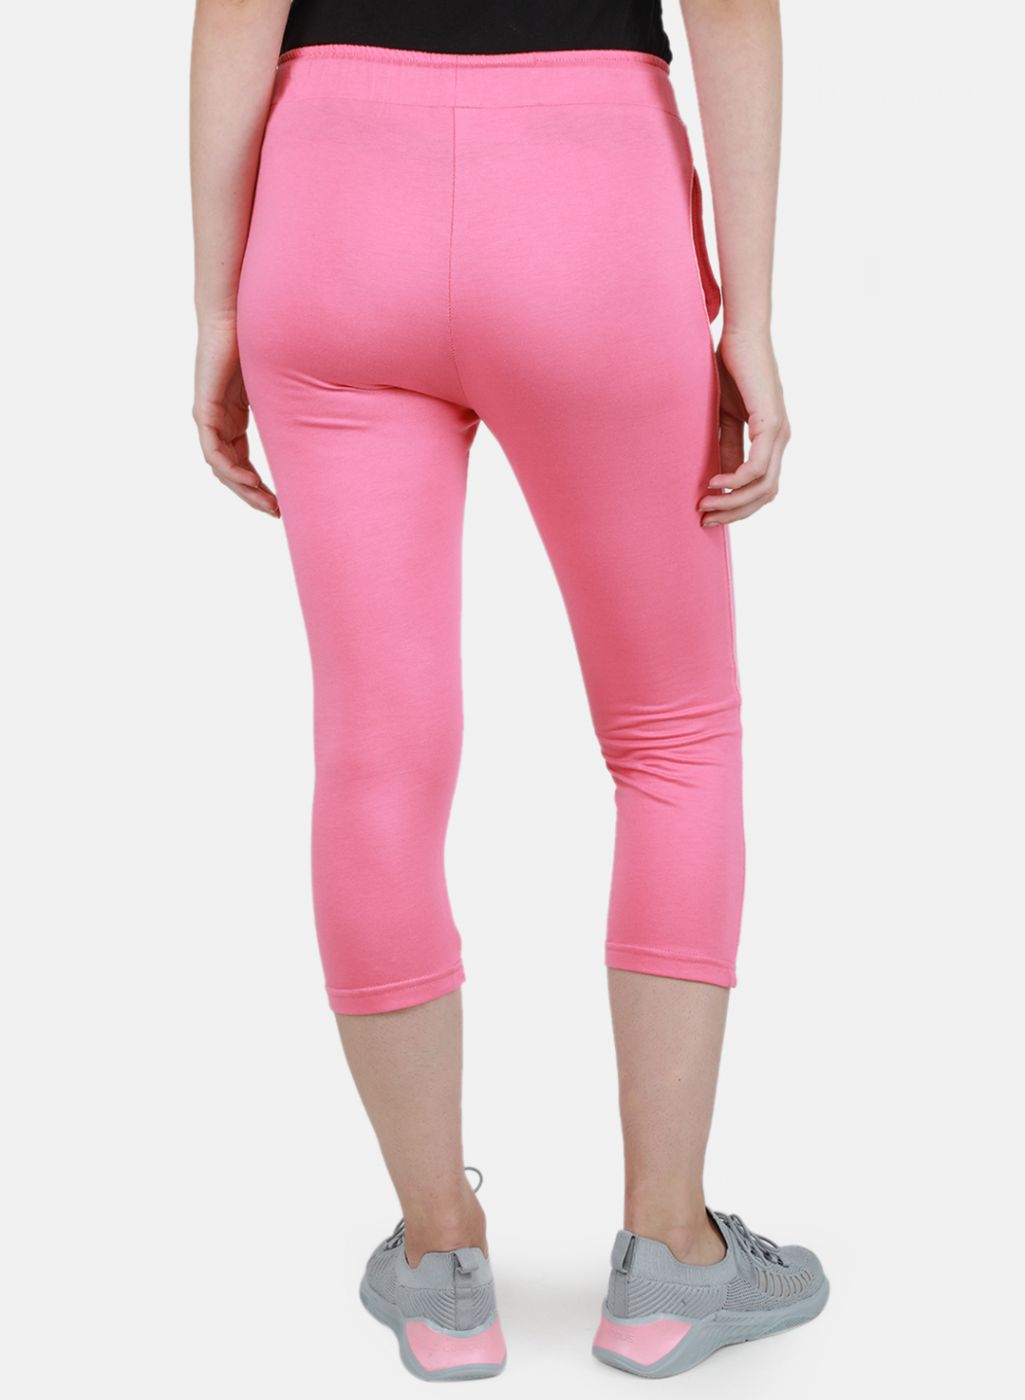 Buy Dress Hub Combo 2 PC Set Girl's Cotton Lycra Leggings Color  DH-1S-S_Baby Pink XL at Amazon.in